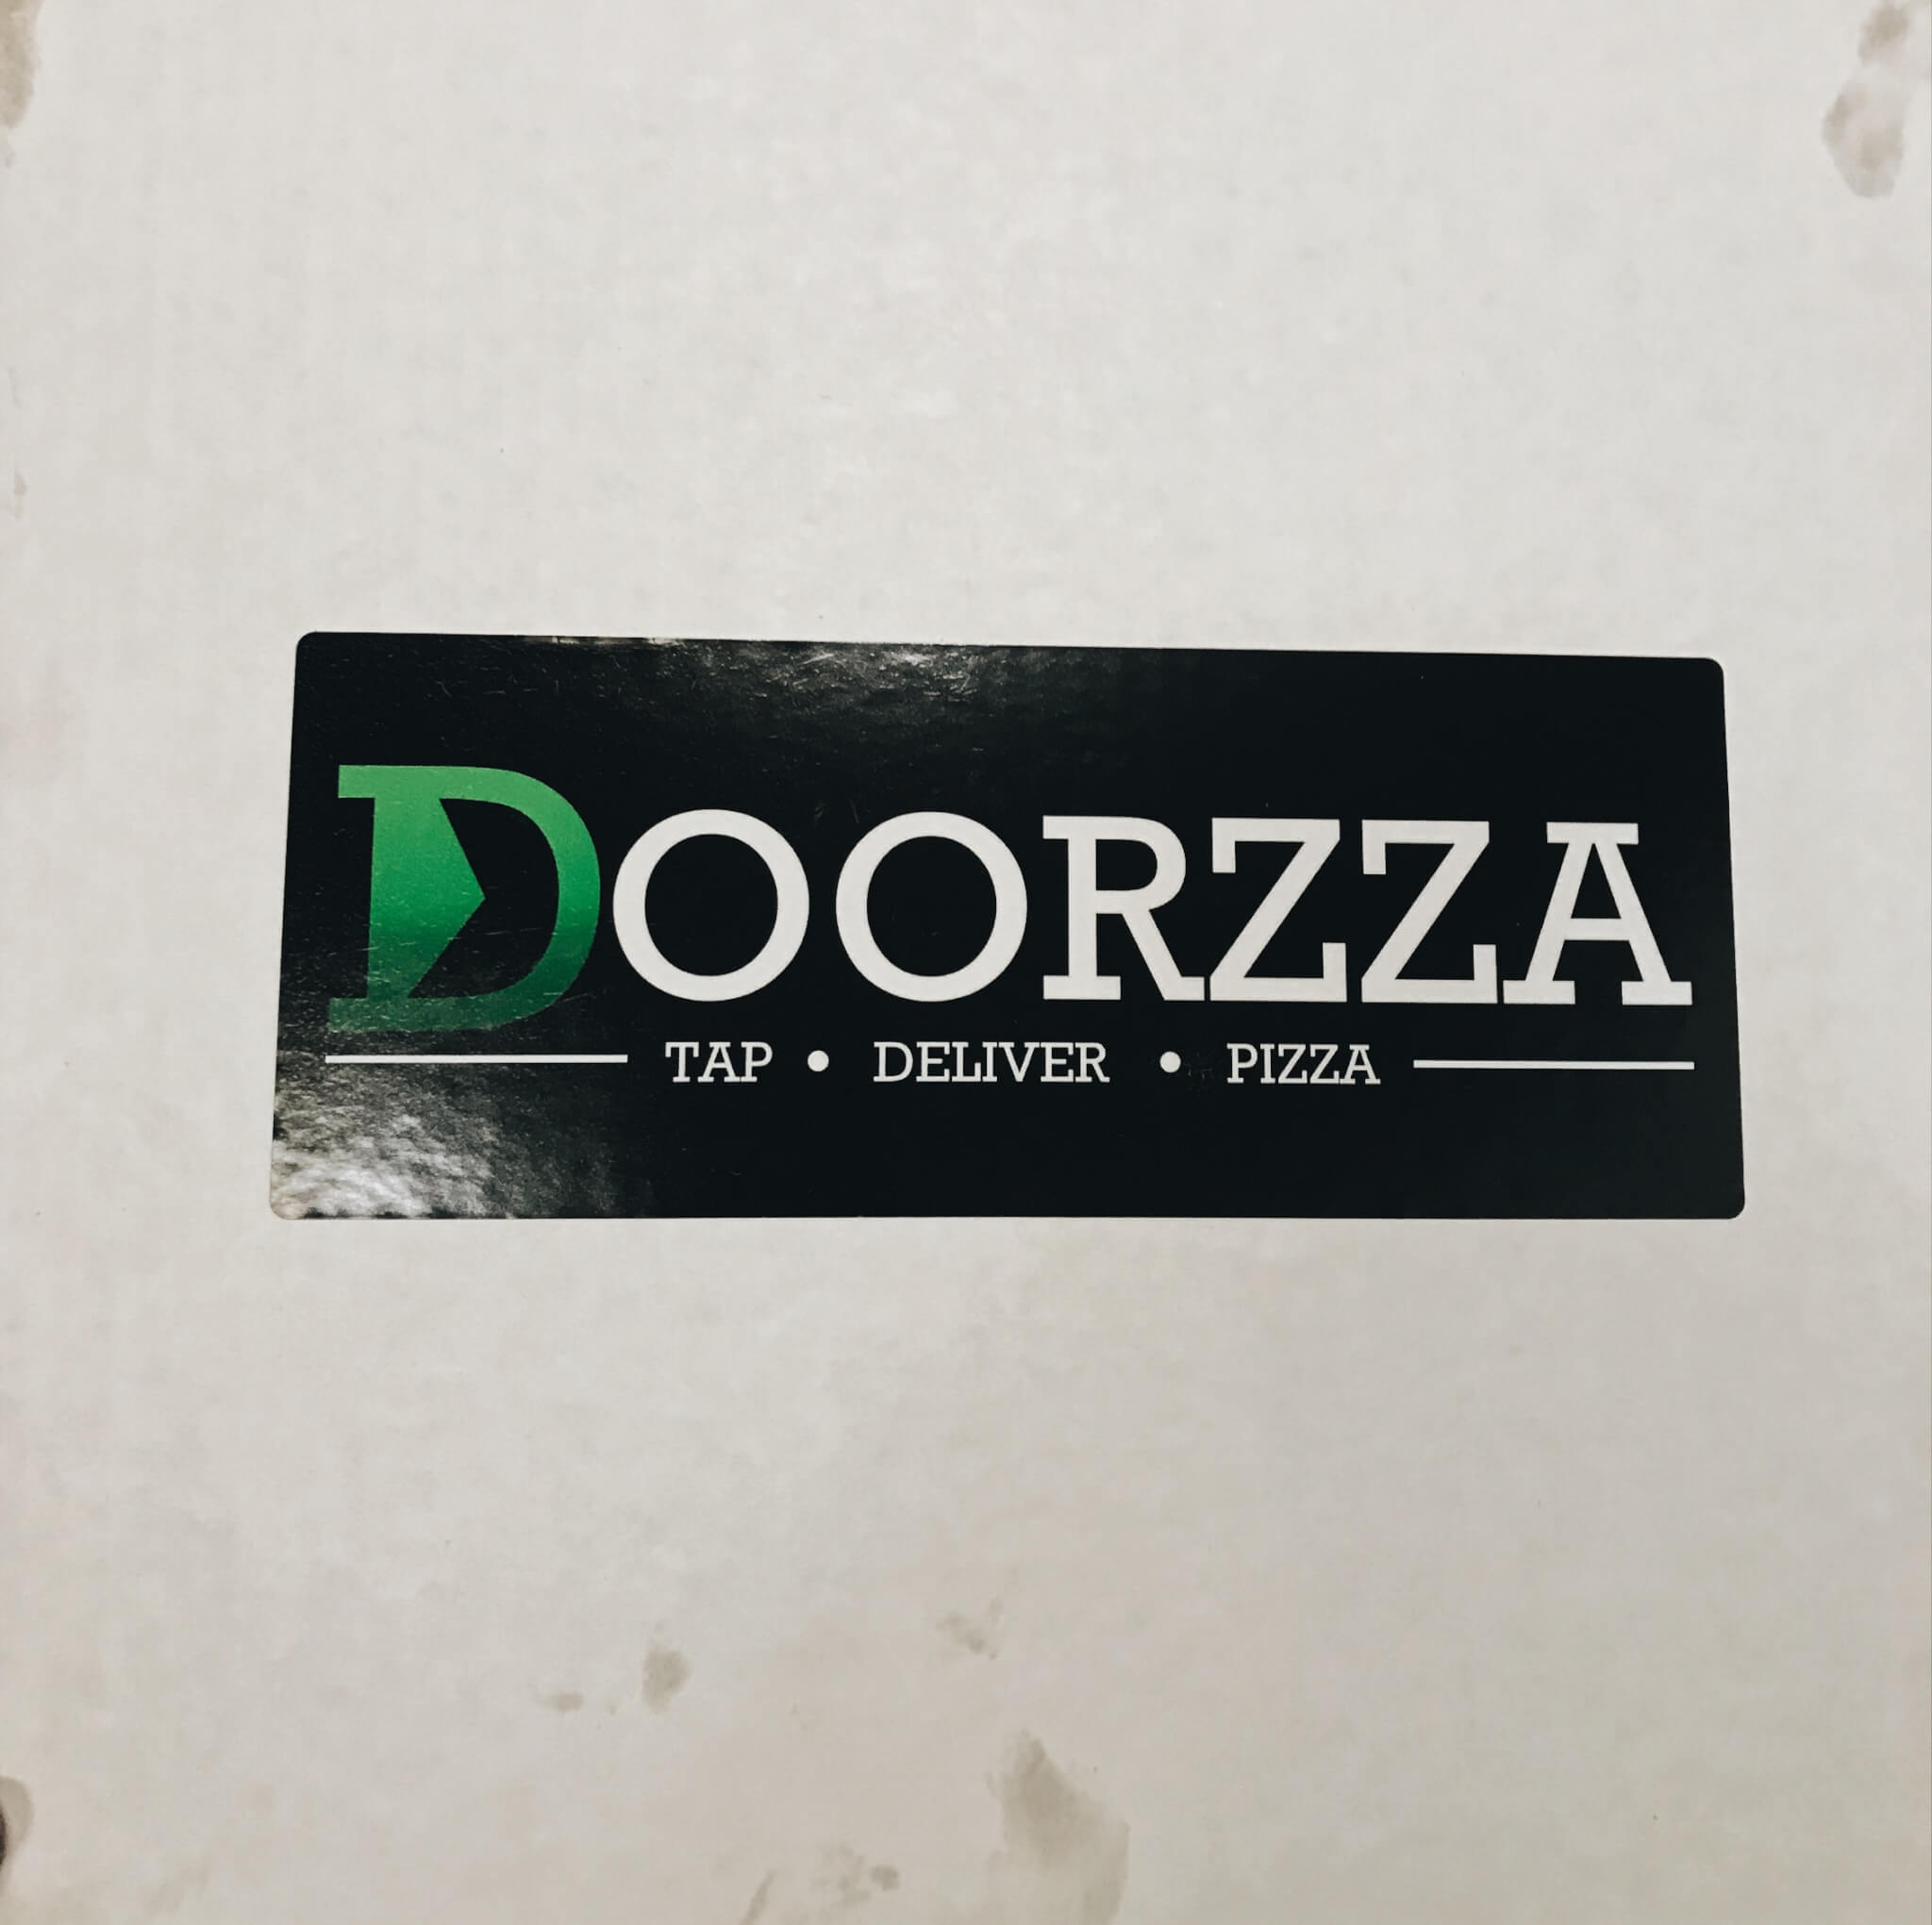 Doorzza is the newest pizza place in Rexburg.